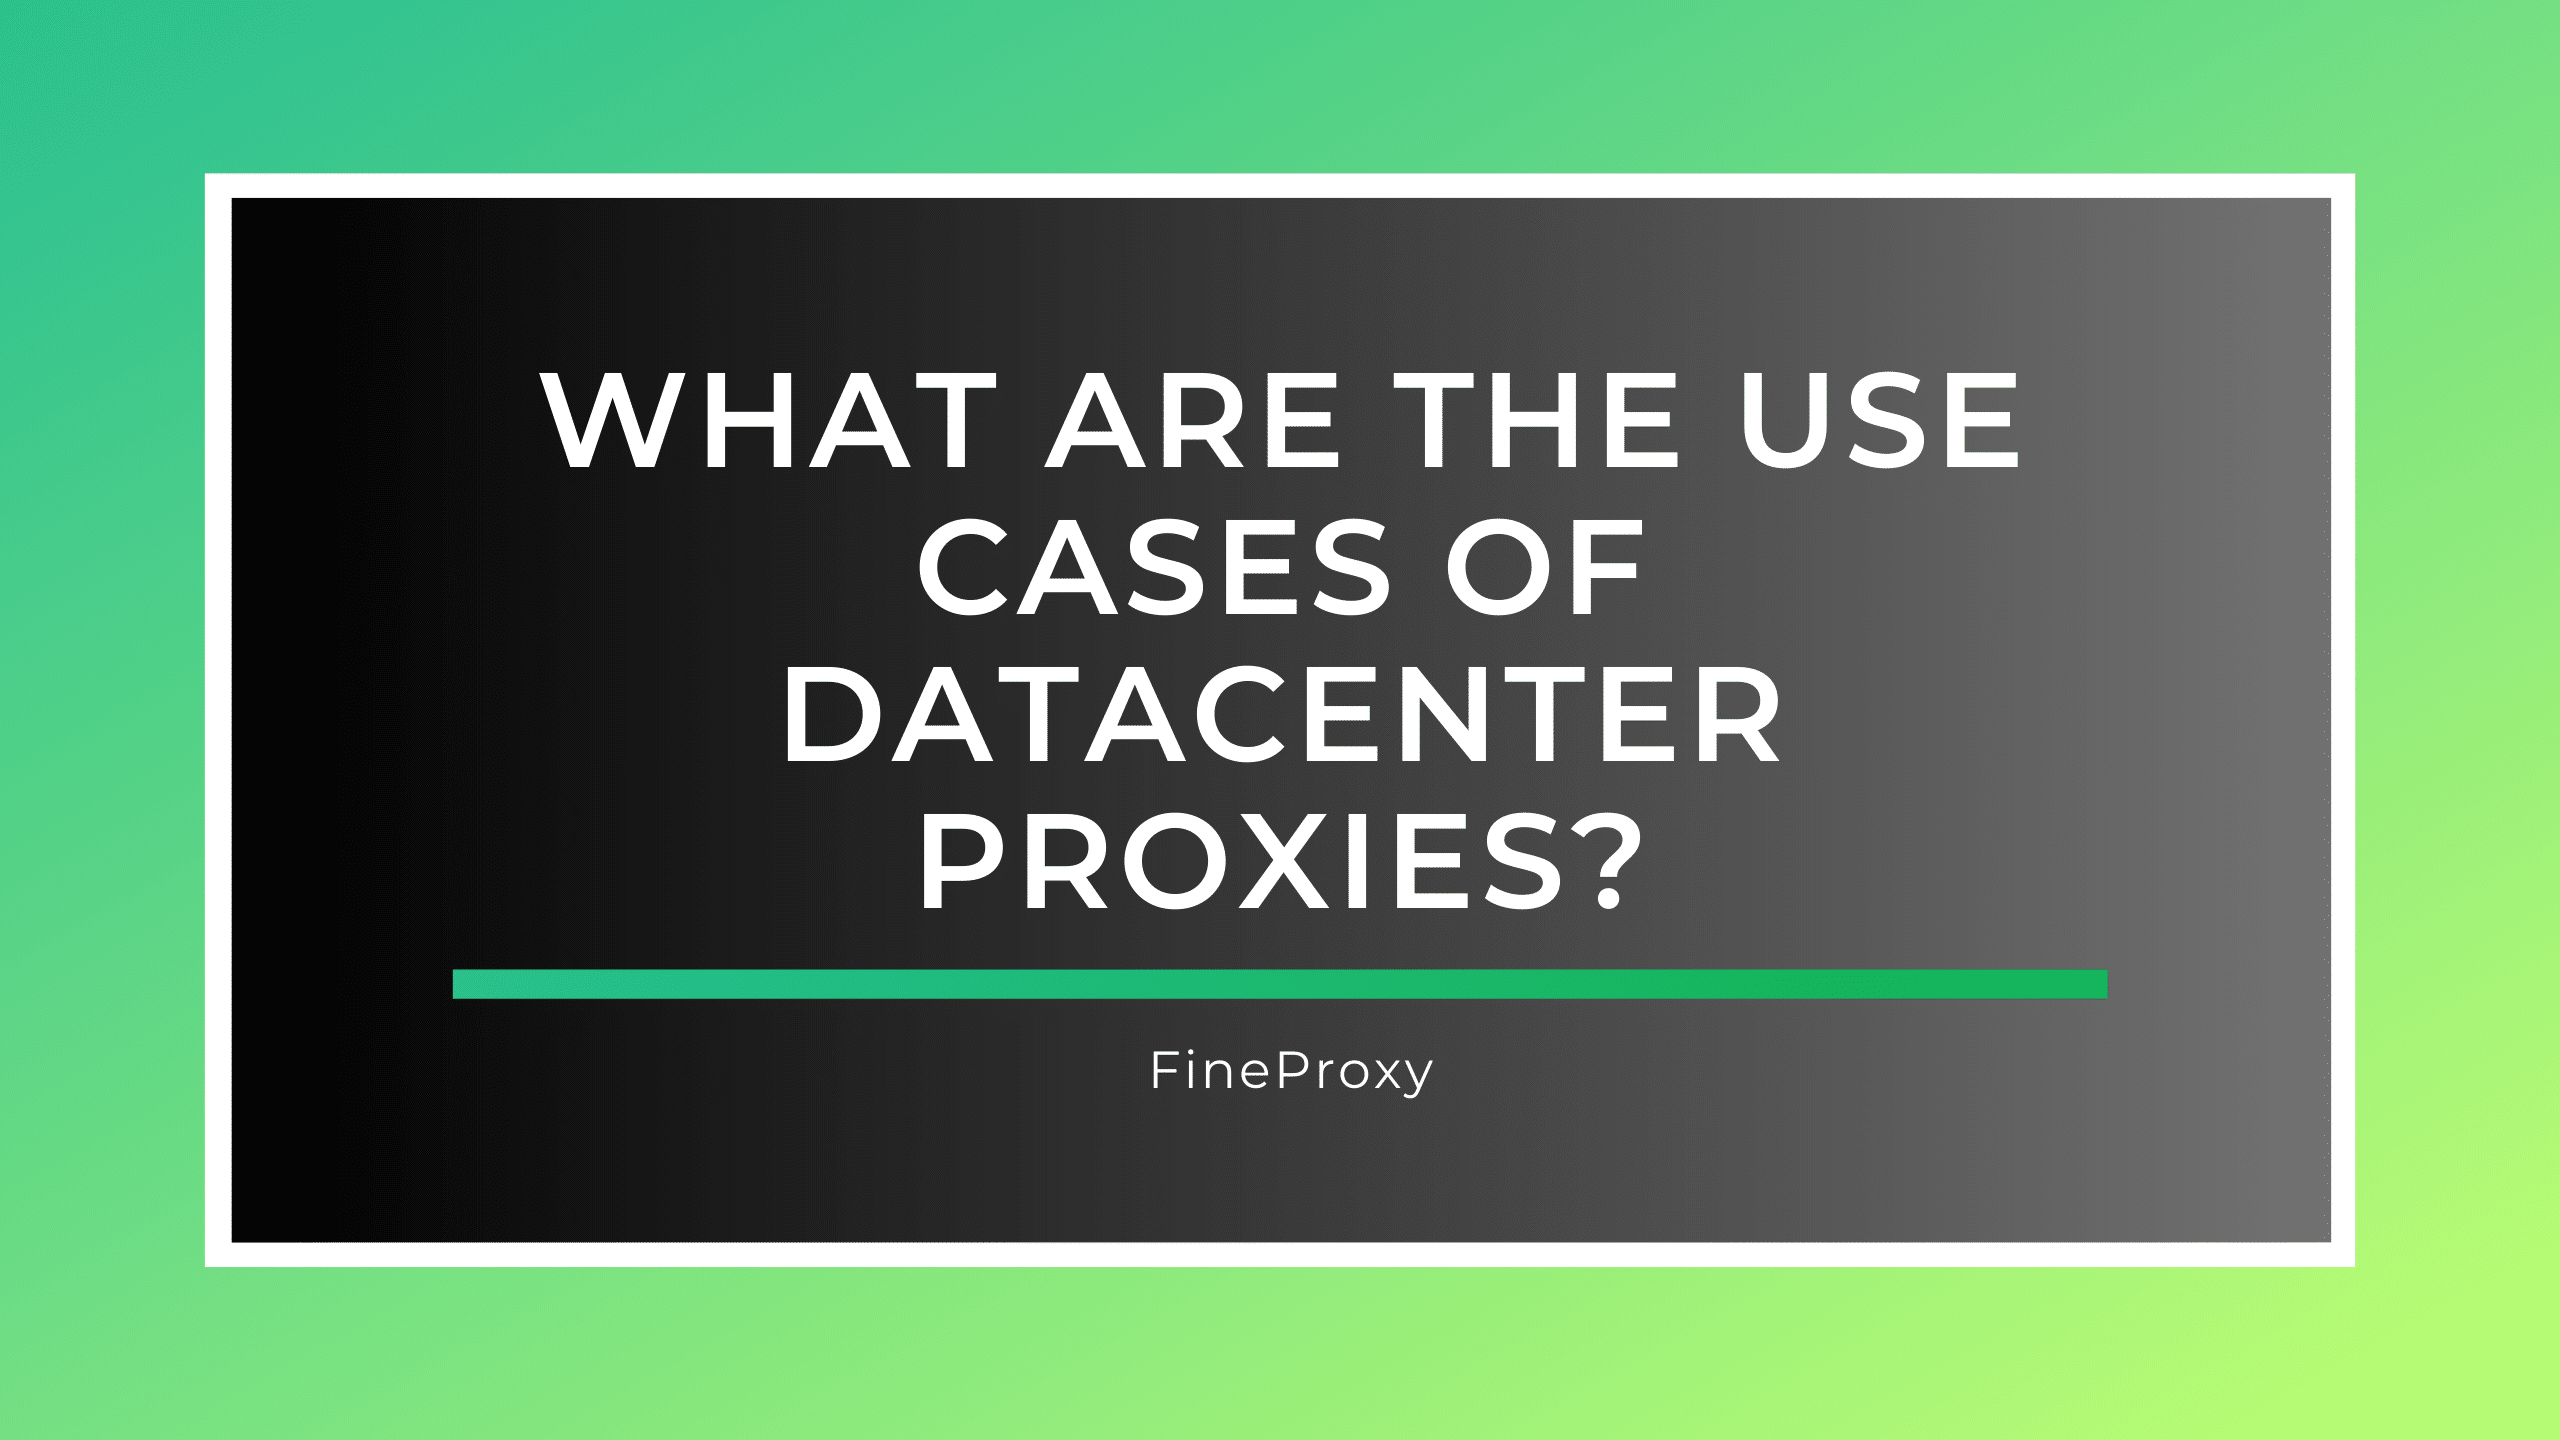 What Are the Use Cases of Datacenter Proxies?